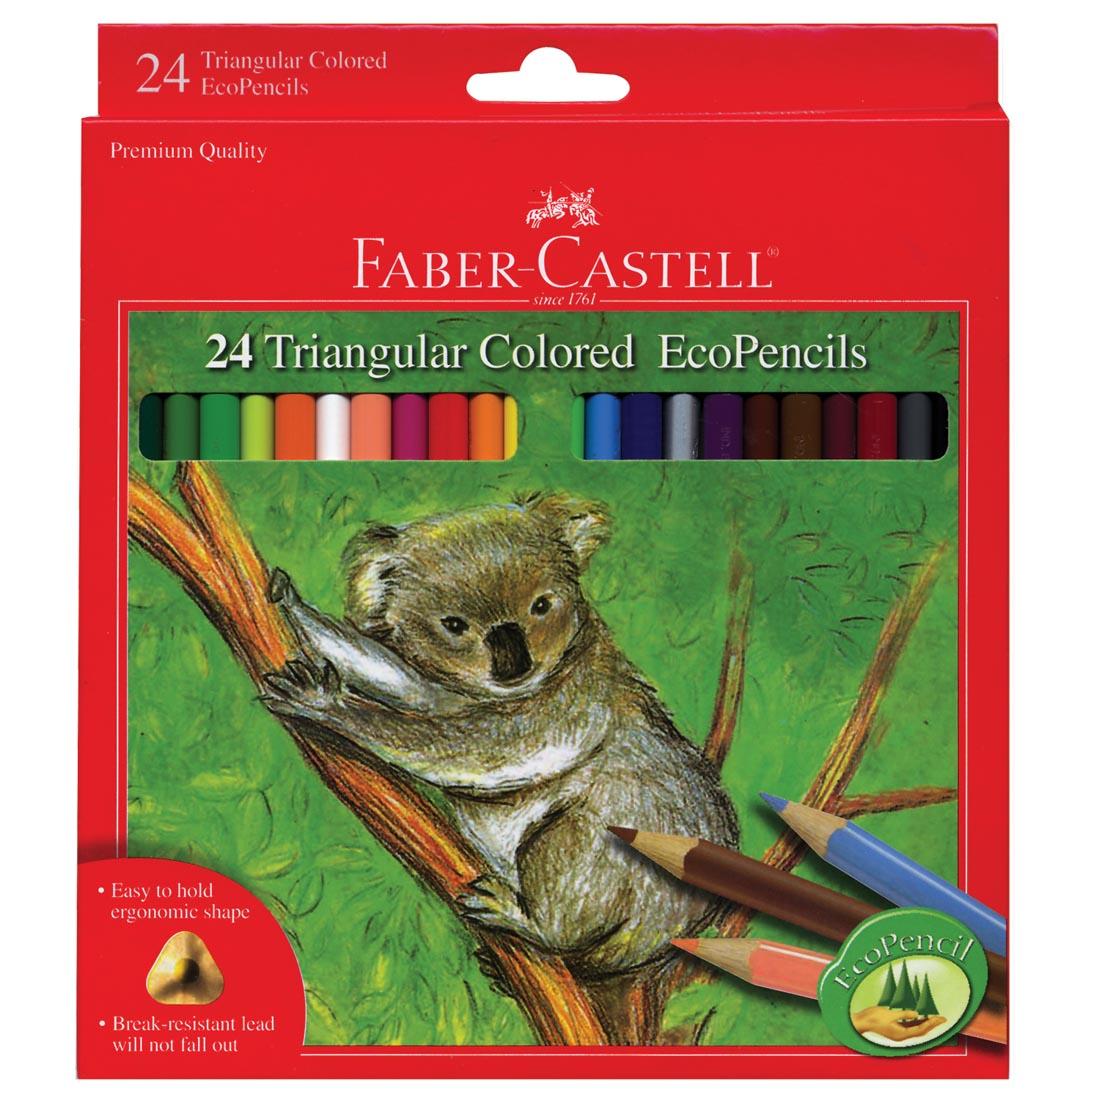 Faber-Castell Triangular Colored EcoPencils 24-Count Set